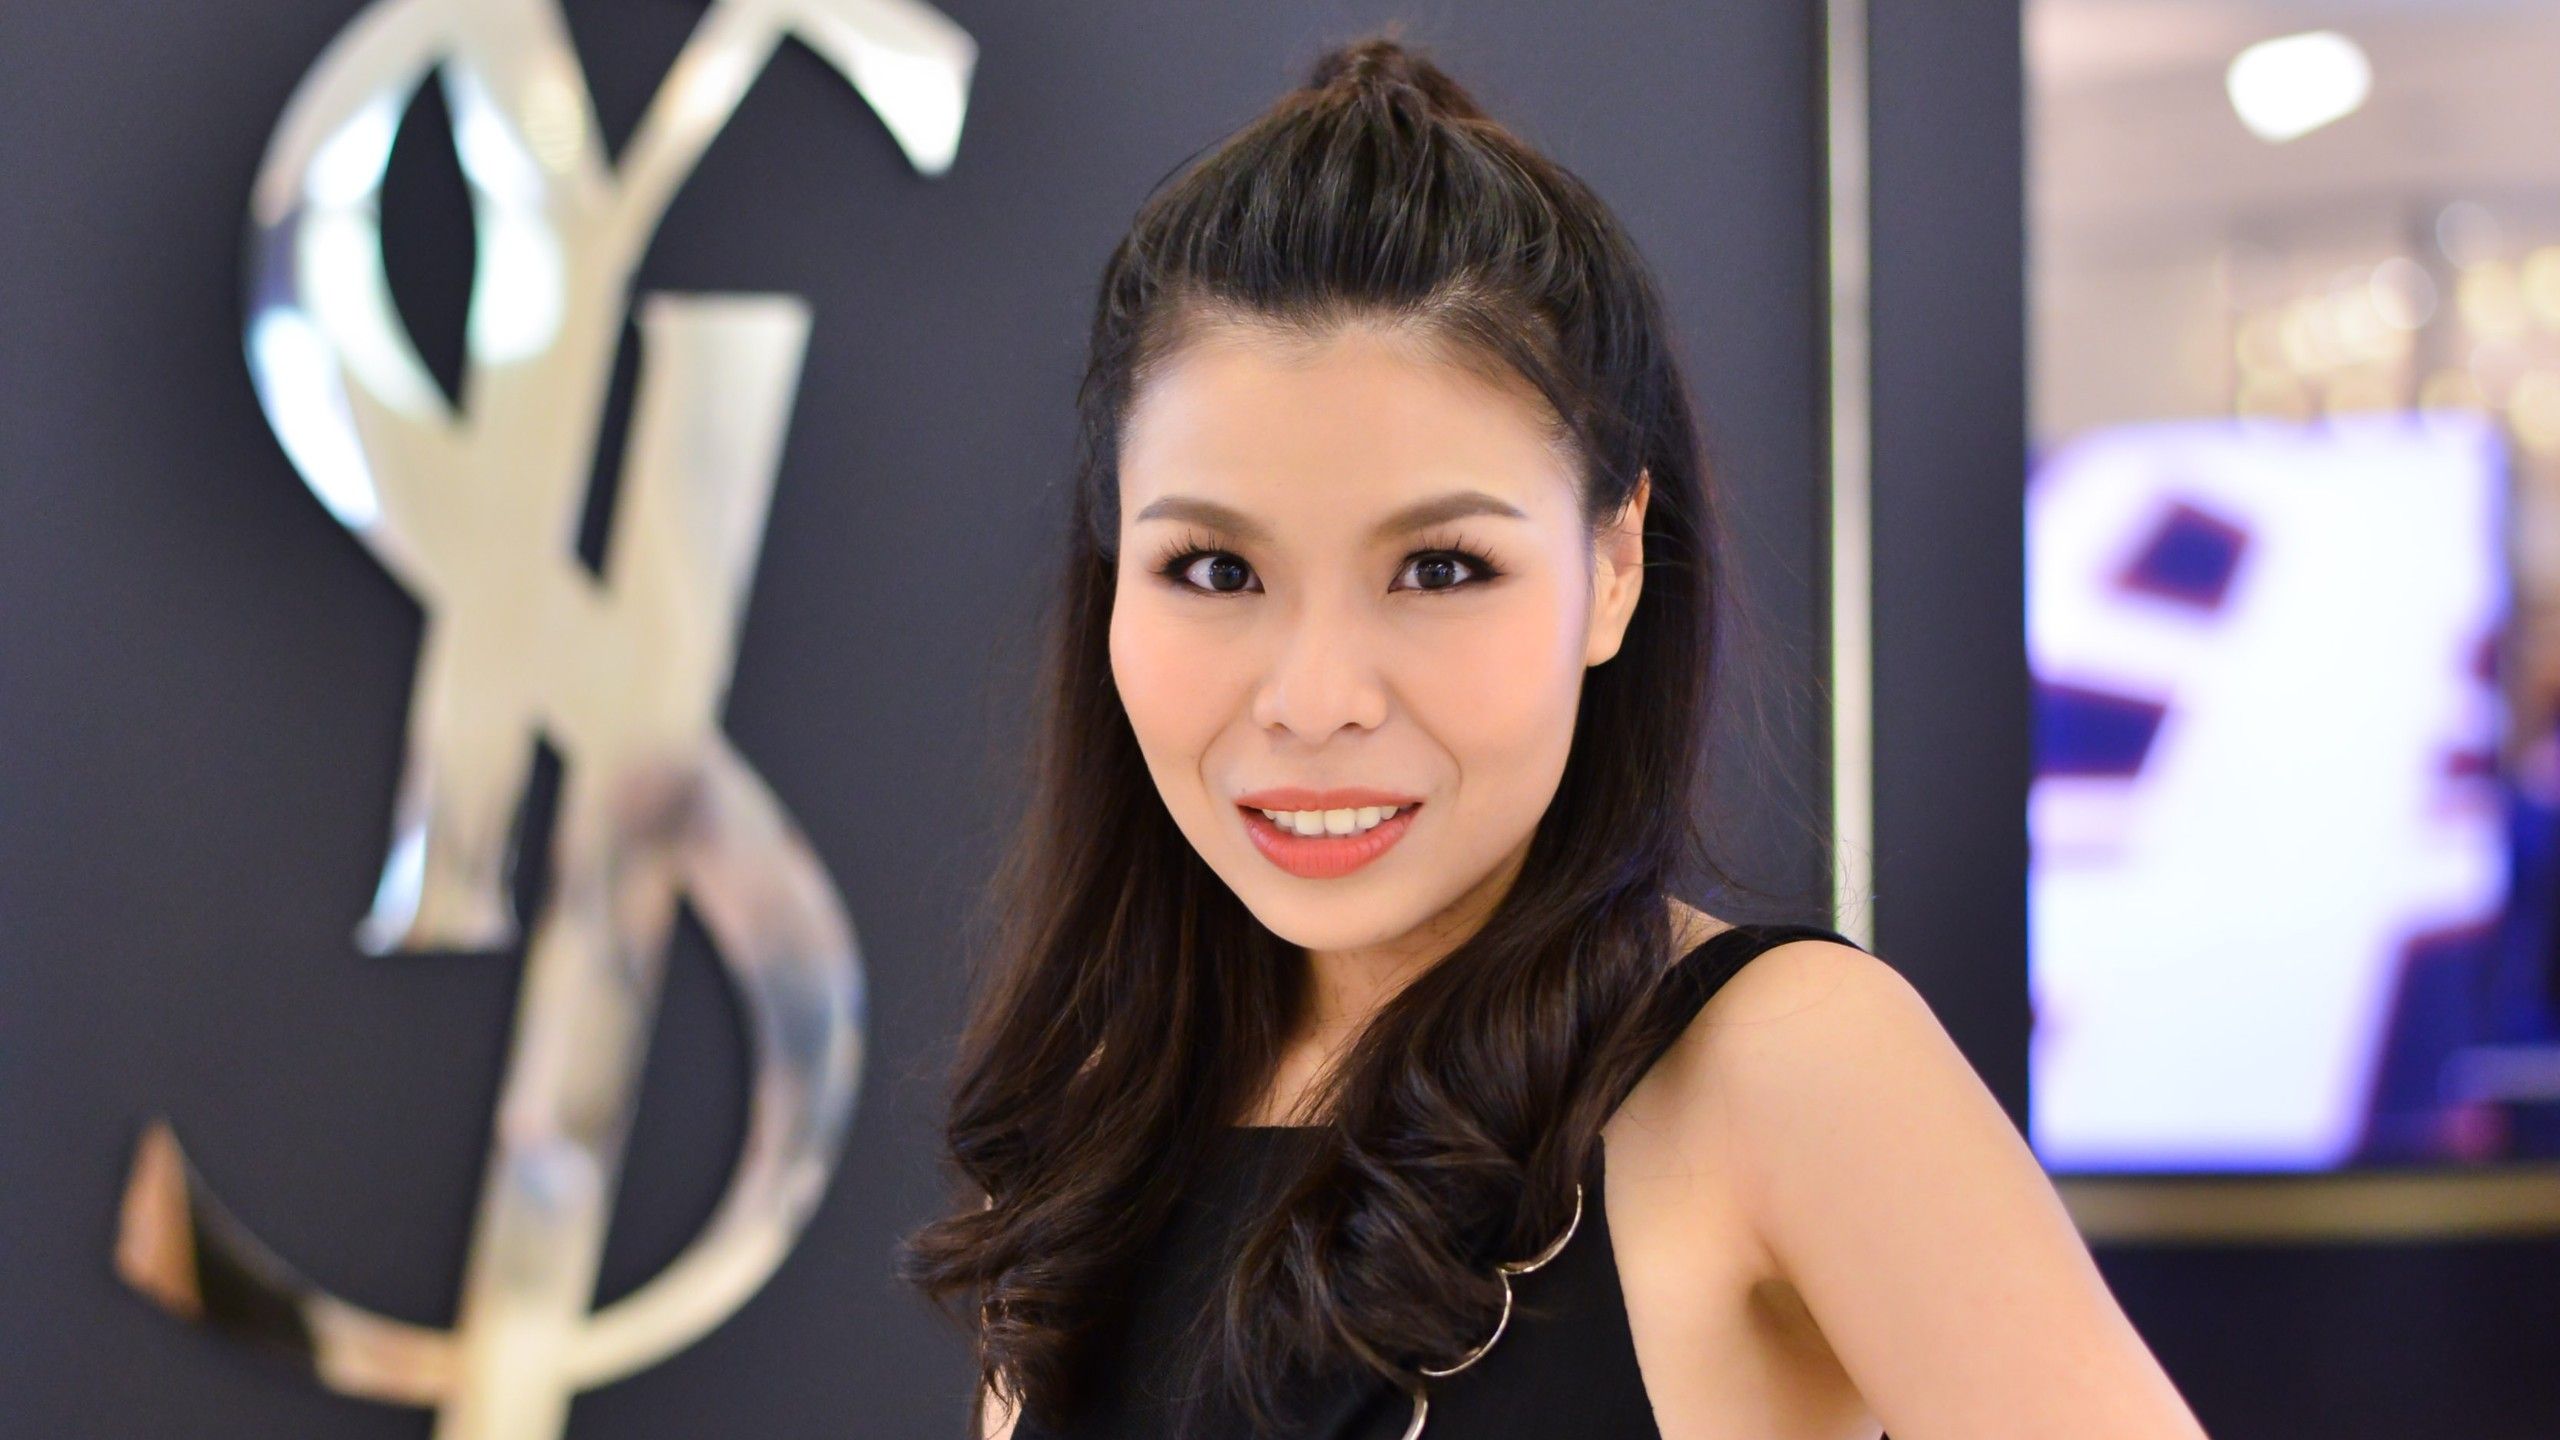 Romchat Lertharn, Master of International Business alumna and Marketing Manager - Lancôme, L’Oréal Thailand